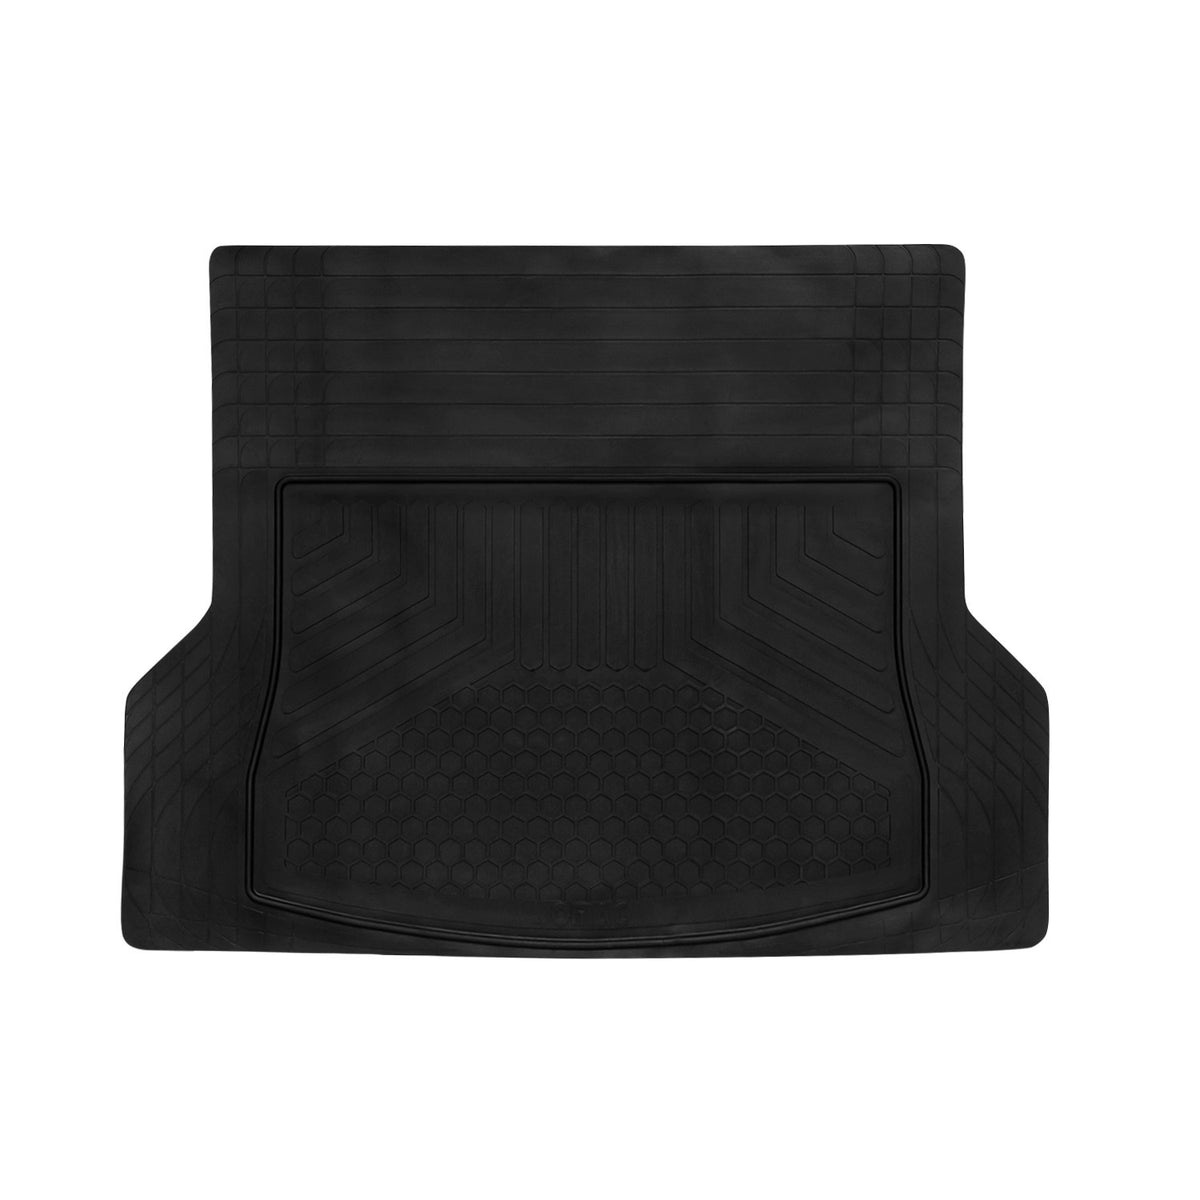 Boot liner anti-slip mat boot liner trimmable for Dacia Duster rubber